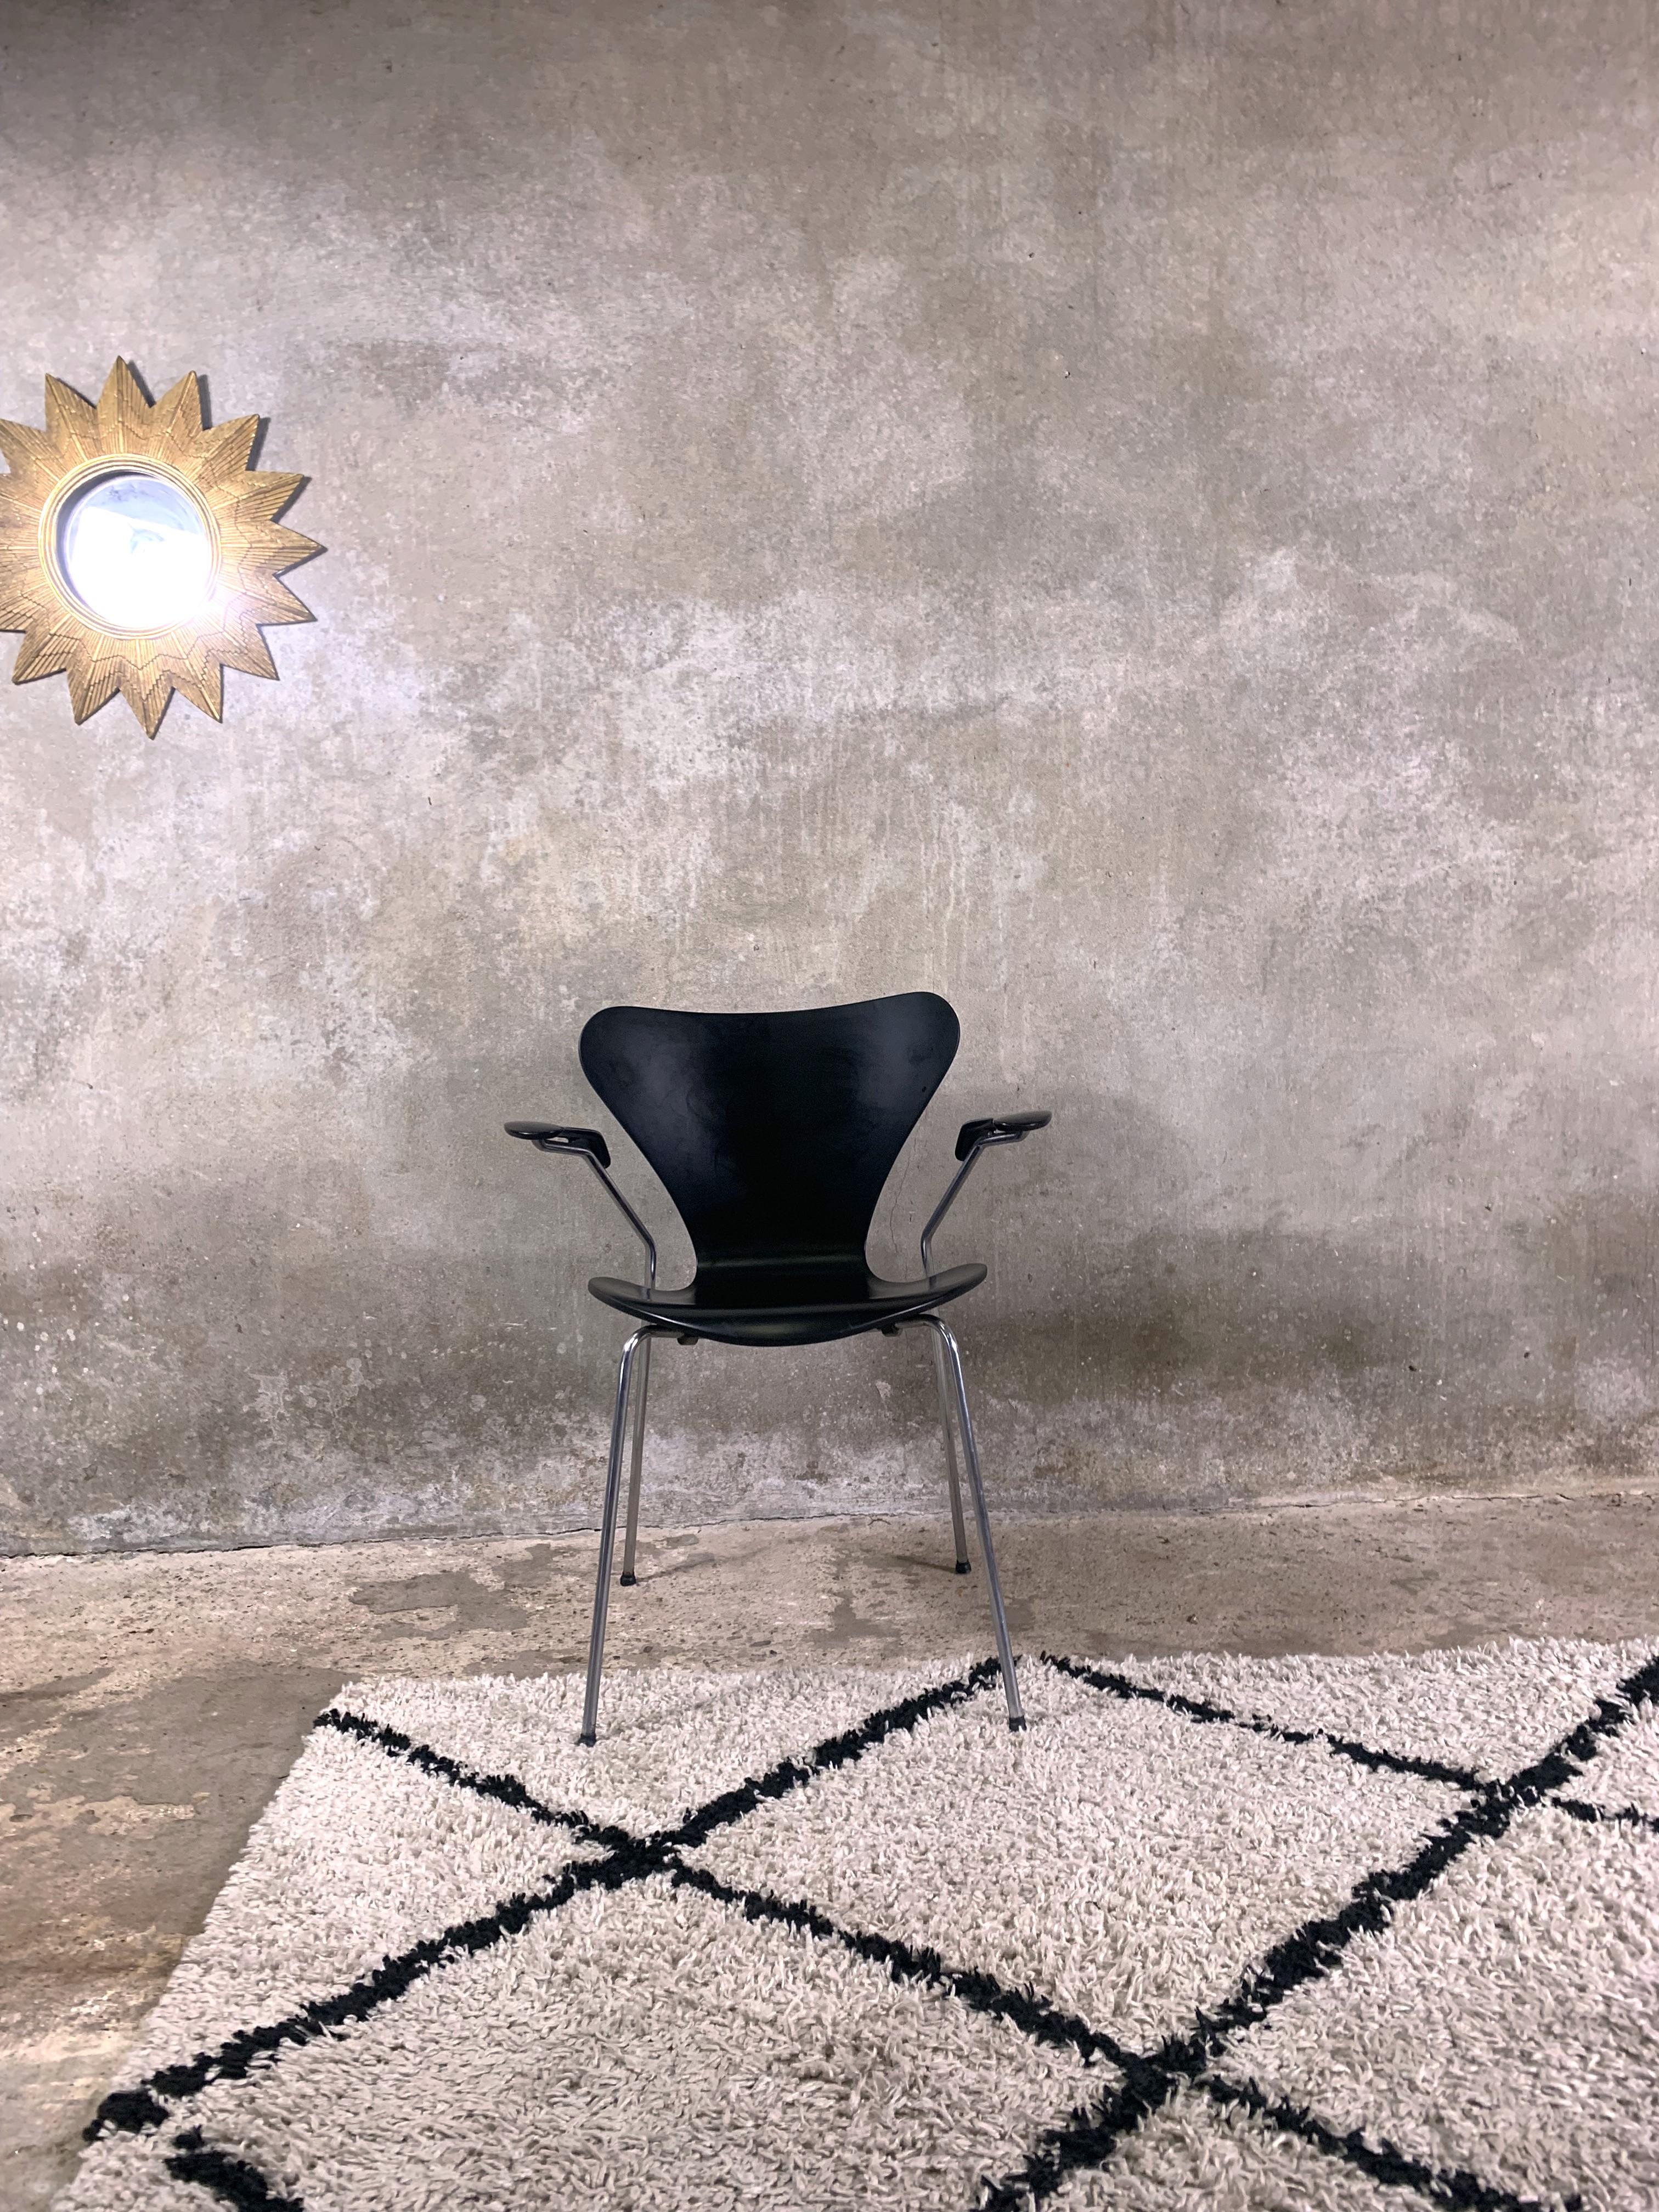 Black Butterfly chair with armrests by Arne Jacobsen for Fritz Hansen , Series 7 Chair, now known as the Butterfly chair, This serie was designed in 1955 and remains one of the most recognizable design projects of all time.
This is the model with